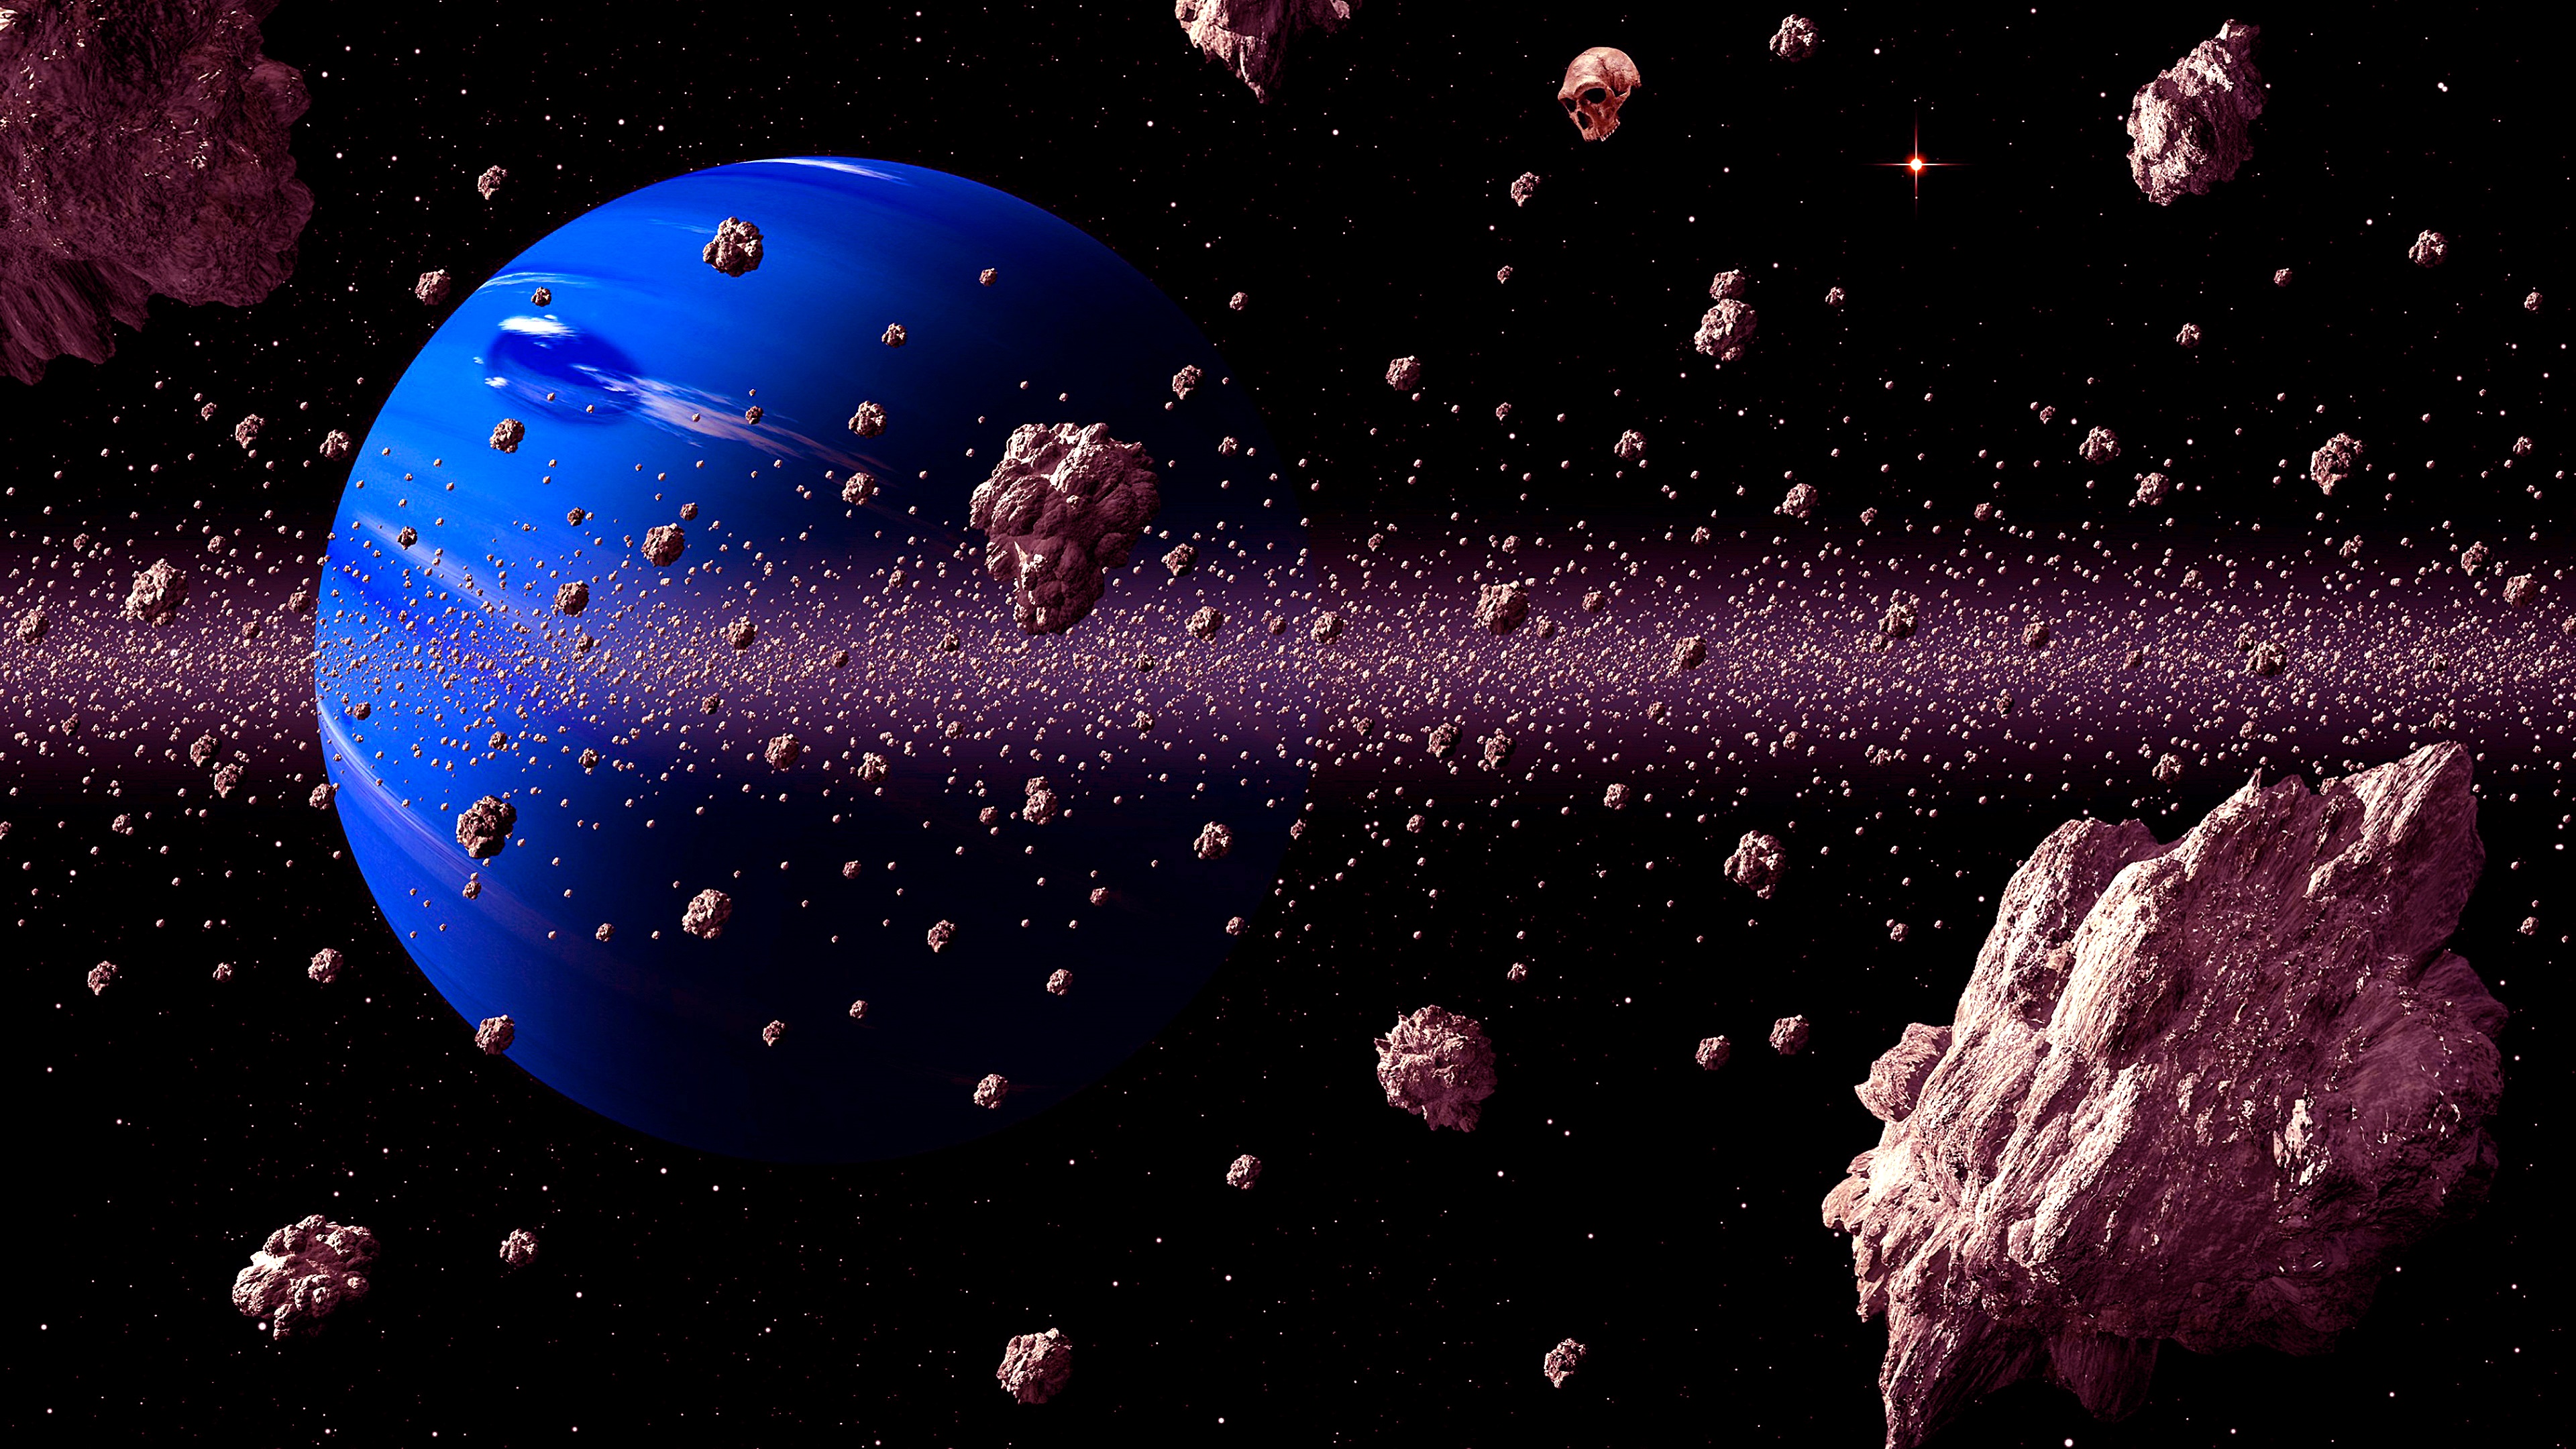 Asteroids and Blue Planet